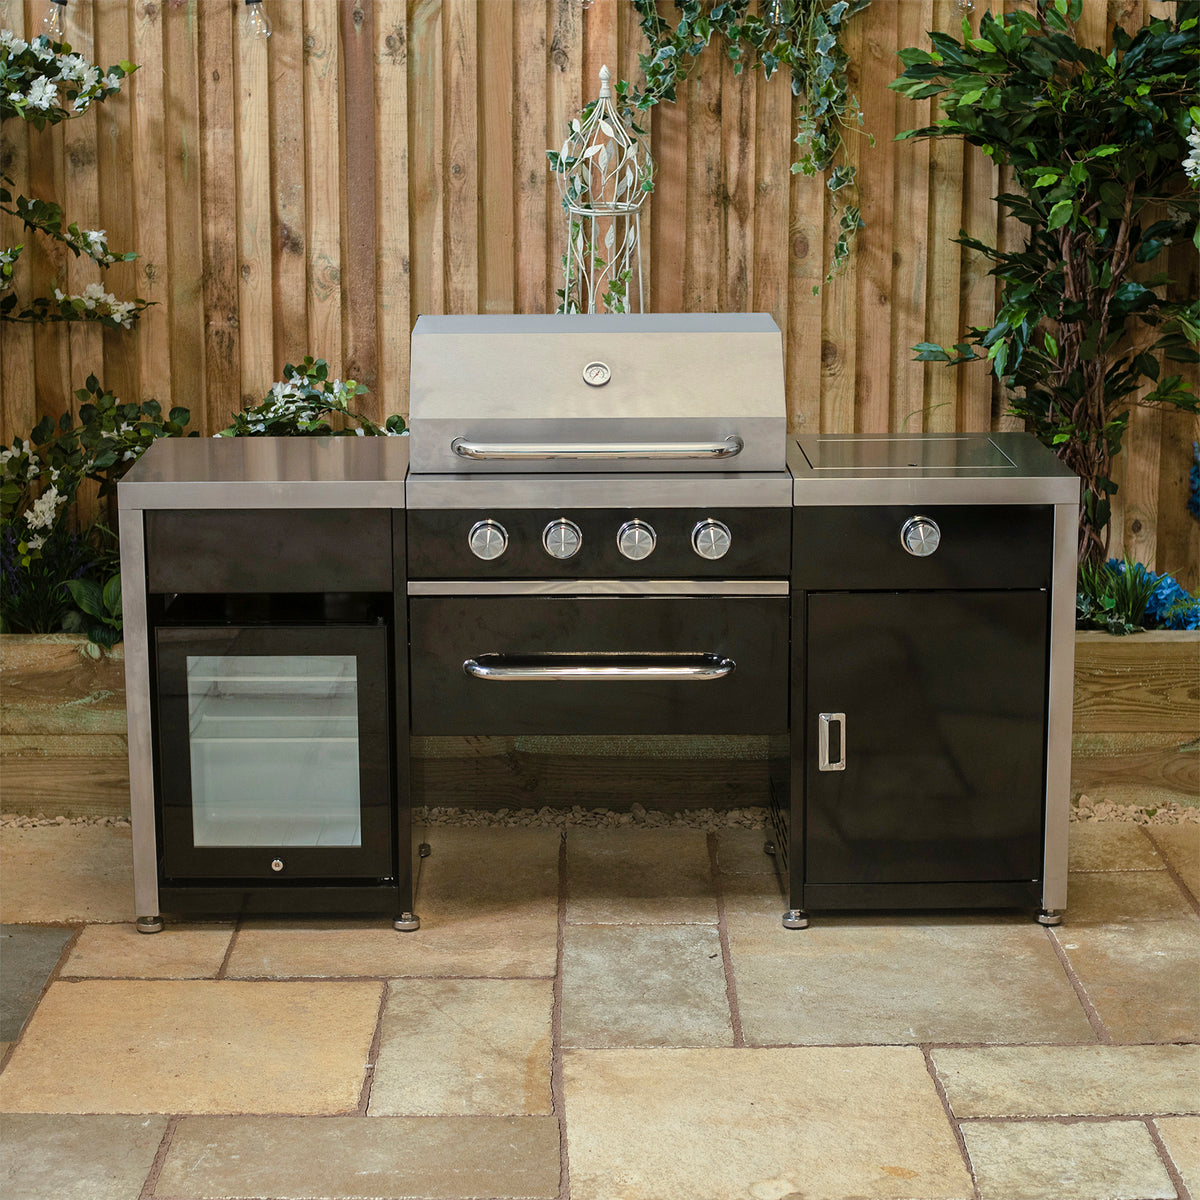 Draco Grills Black 4 Burner Gas Barbecue Outdoor Kitchen Island with Fridge and Side Burner